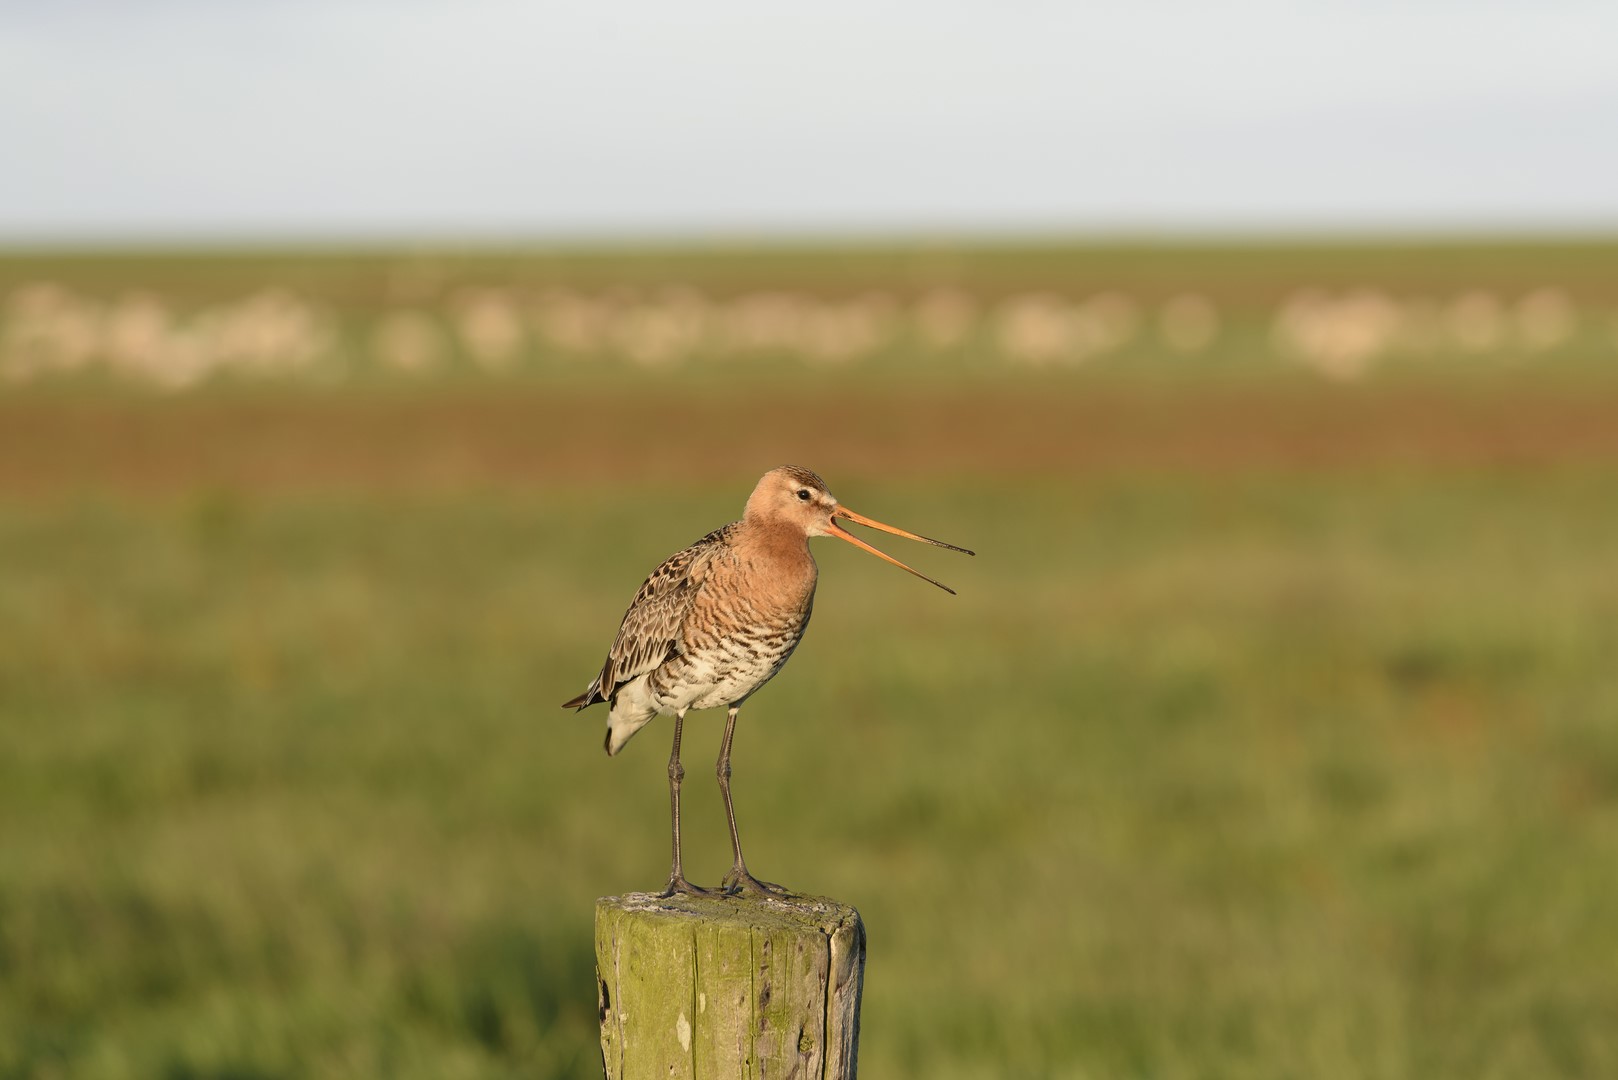 Gotwit sits on pole with its beak open, meadow sheep blurry background